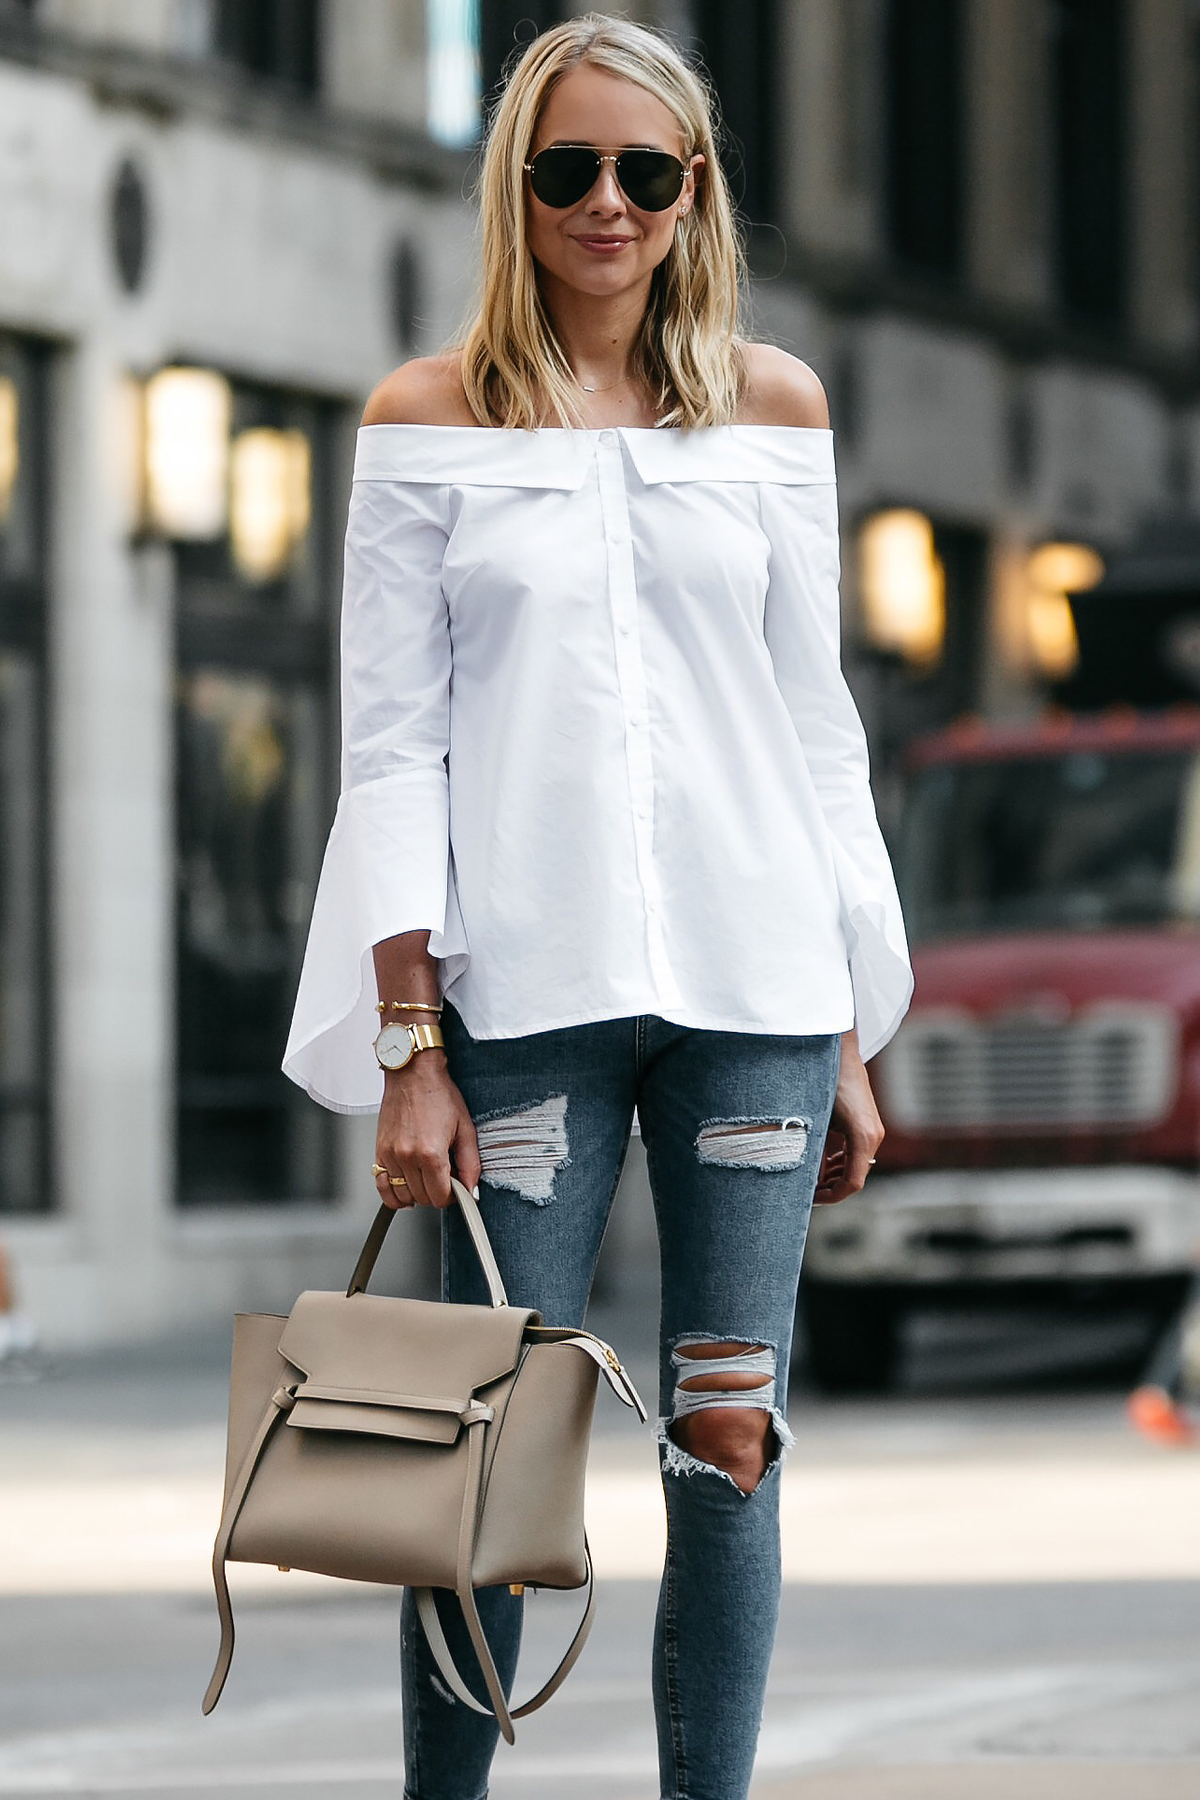 Blonde Woman Wearing Nordstrom Anniversary Sale White Bell-Sleeve off-the-shoulder Top Topshop Denim Ripped Skinny Jeans Outfit Celine Belt Bag Celine Aviator Sunglasses Fashion Jackson Dallas Blogger Fashion Blogger Street Style